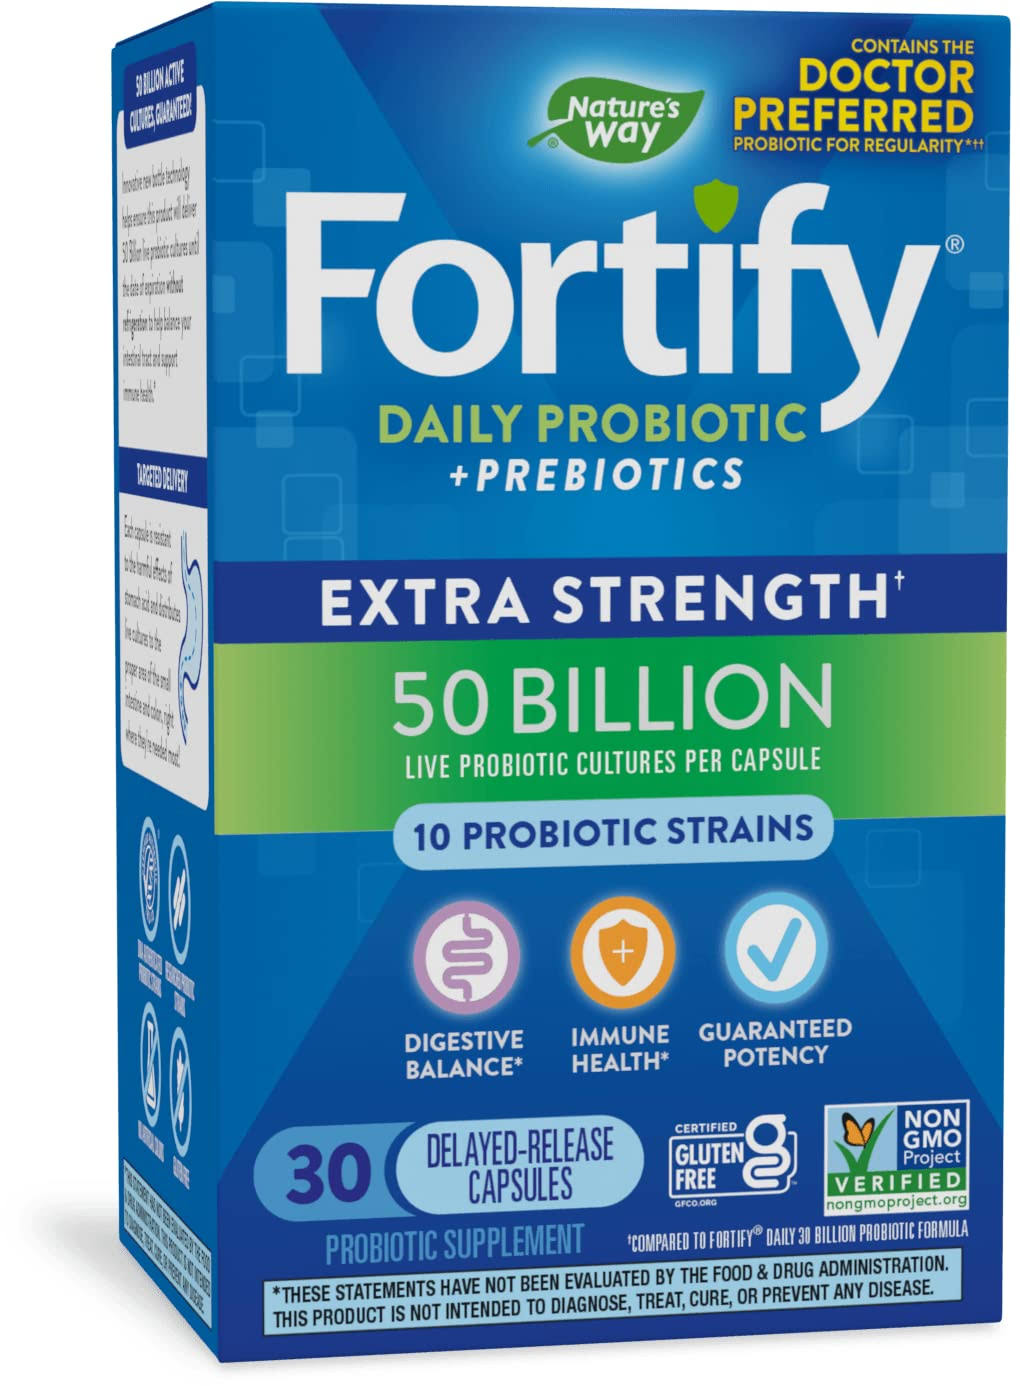 Nature's Way Primadophilus Daily Probiotic Fortify Supplements - 30ct